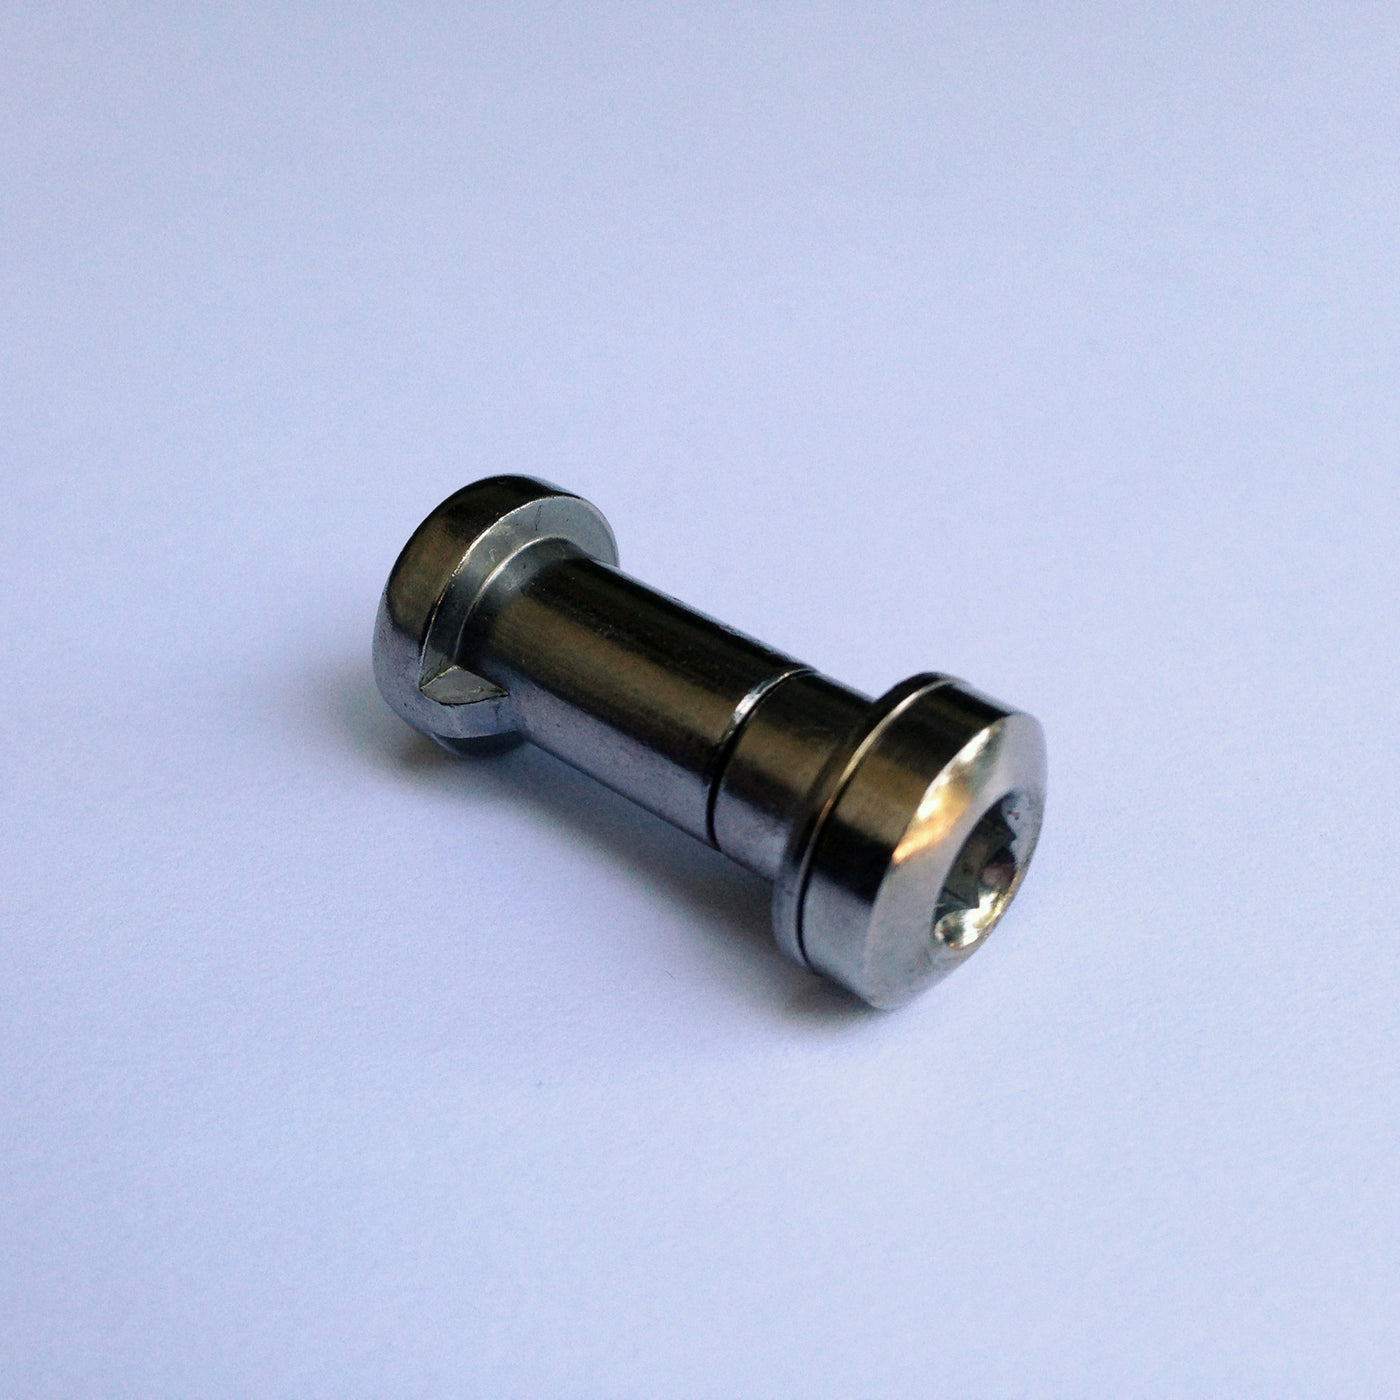 Bicycle seatpost binder bolt - This bolt measures 19mm between the heads.